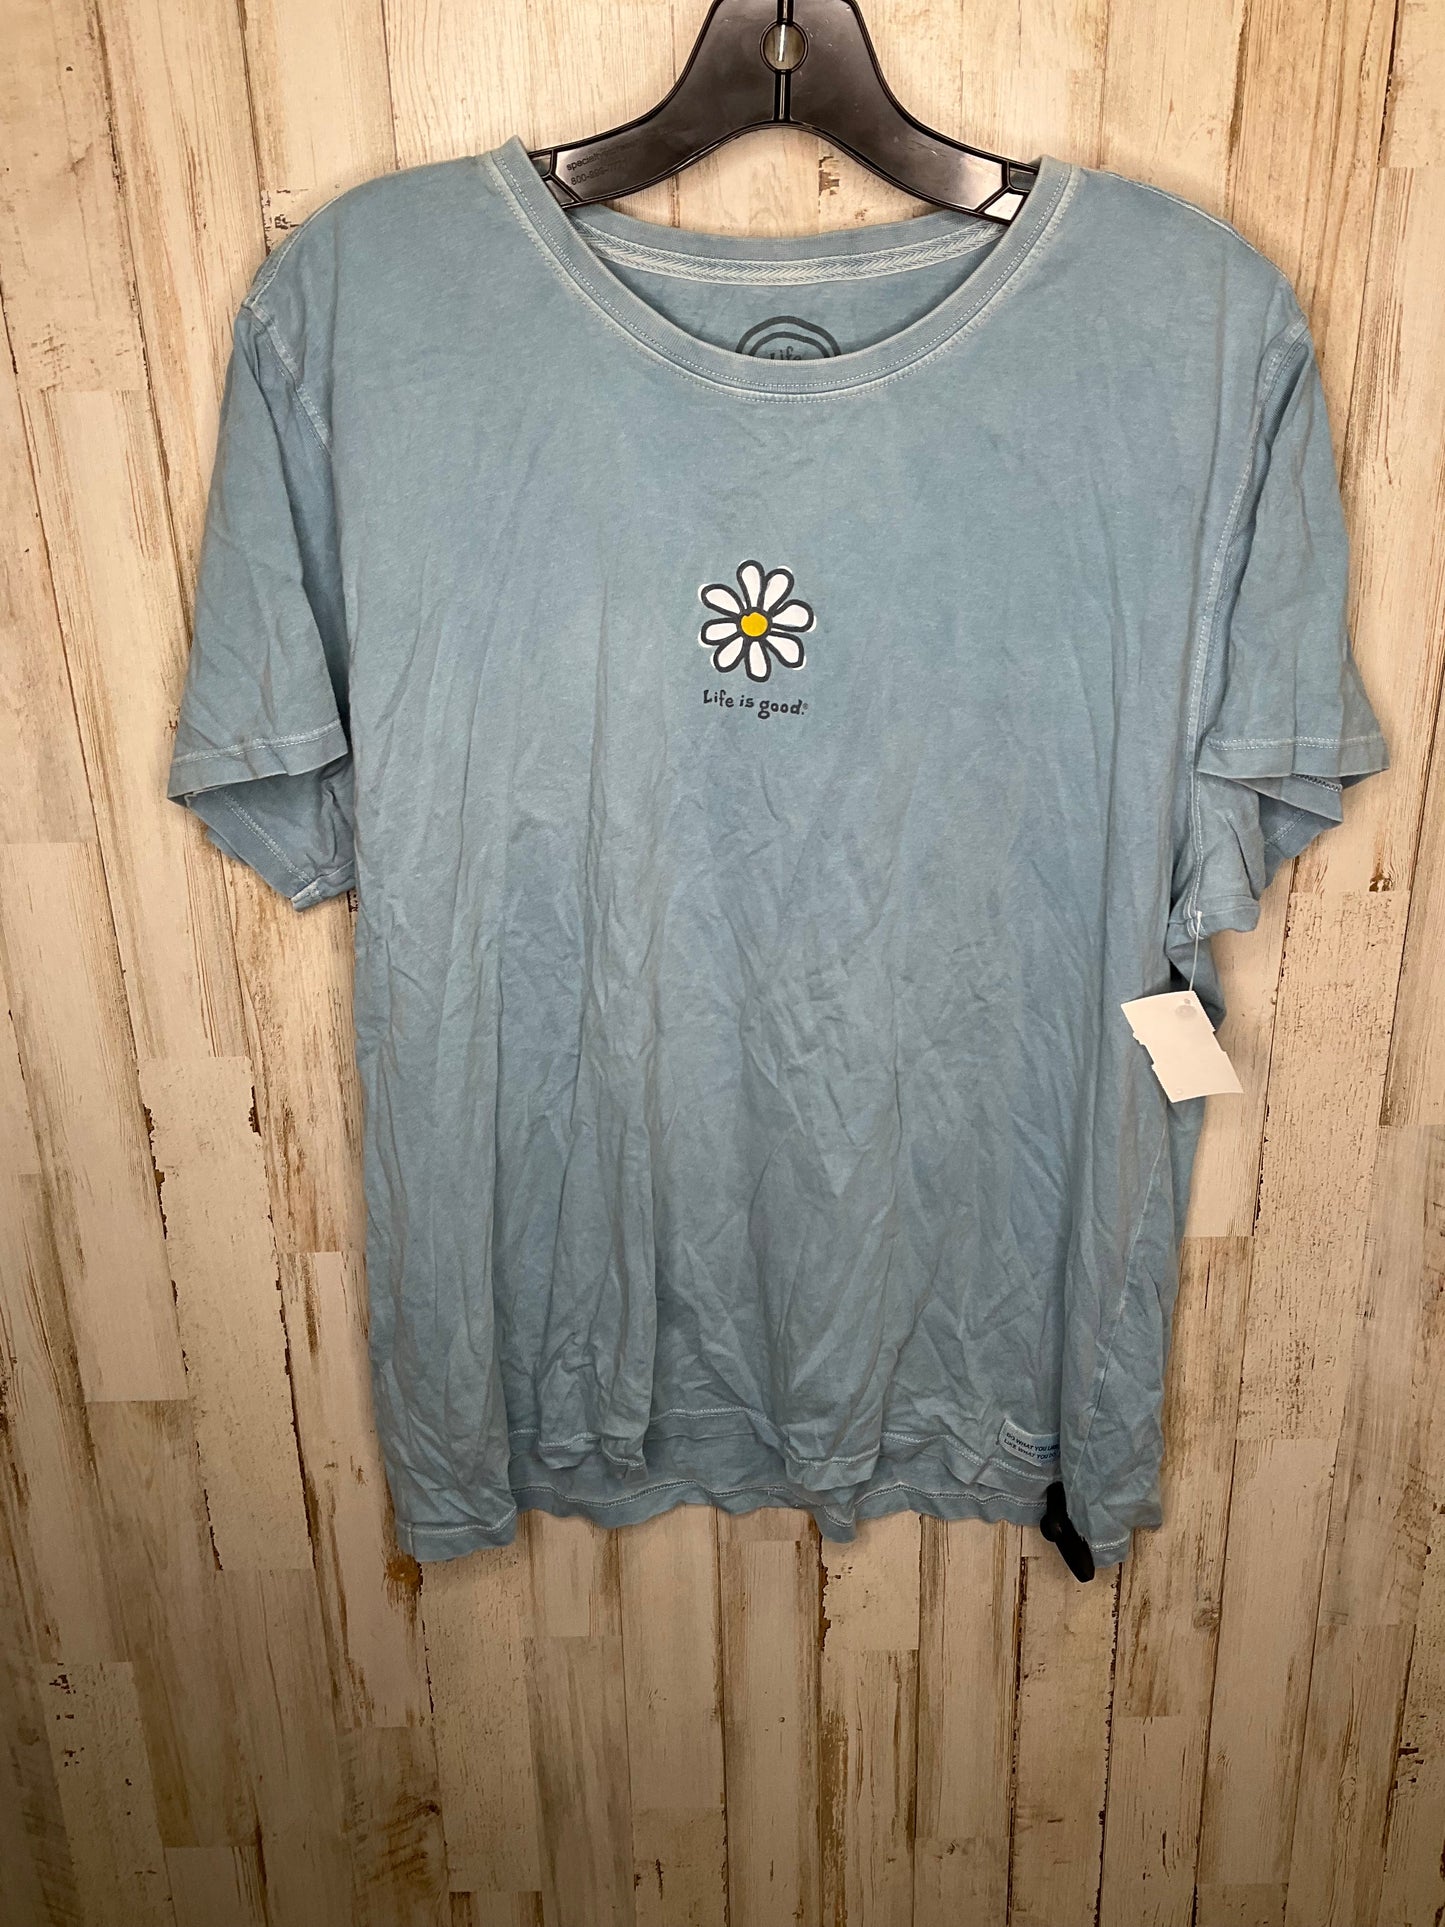 Blue Top Short Sleeve Life Is Good, Size Xl